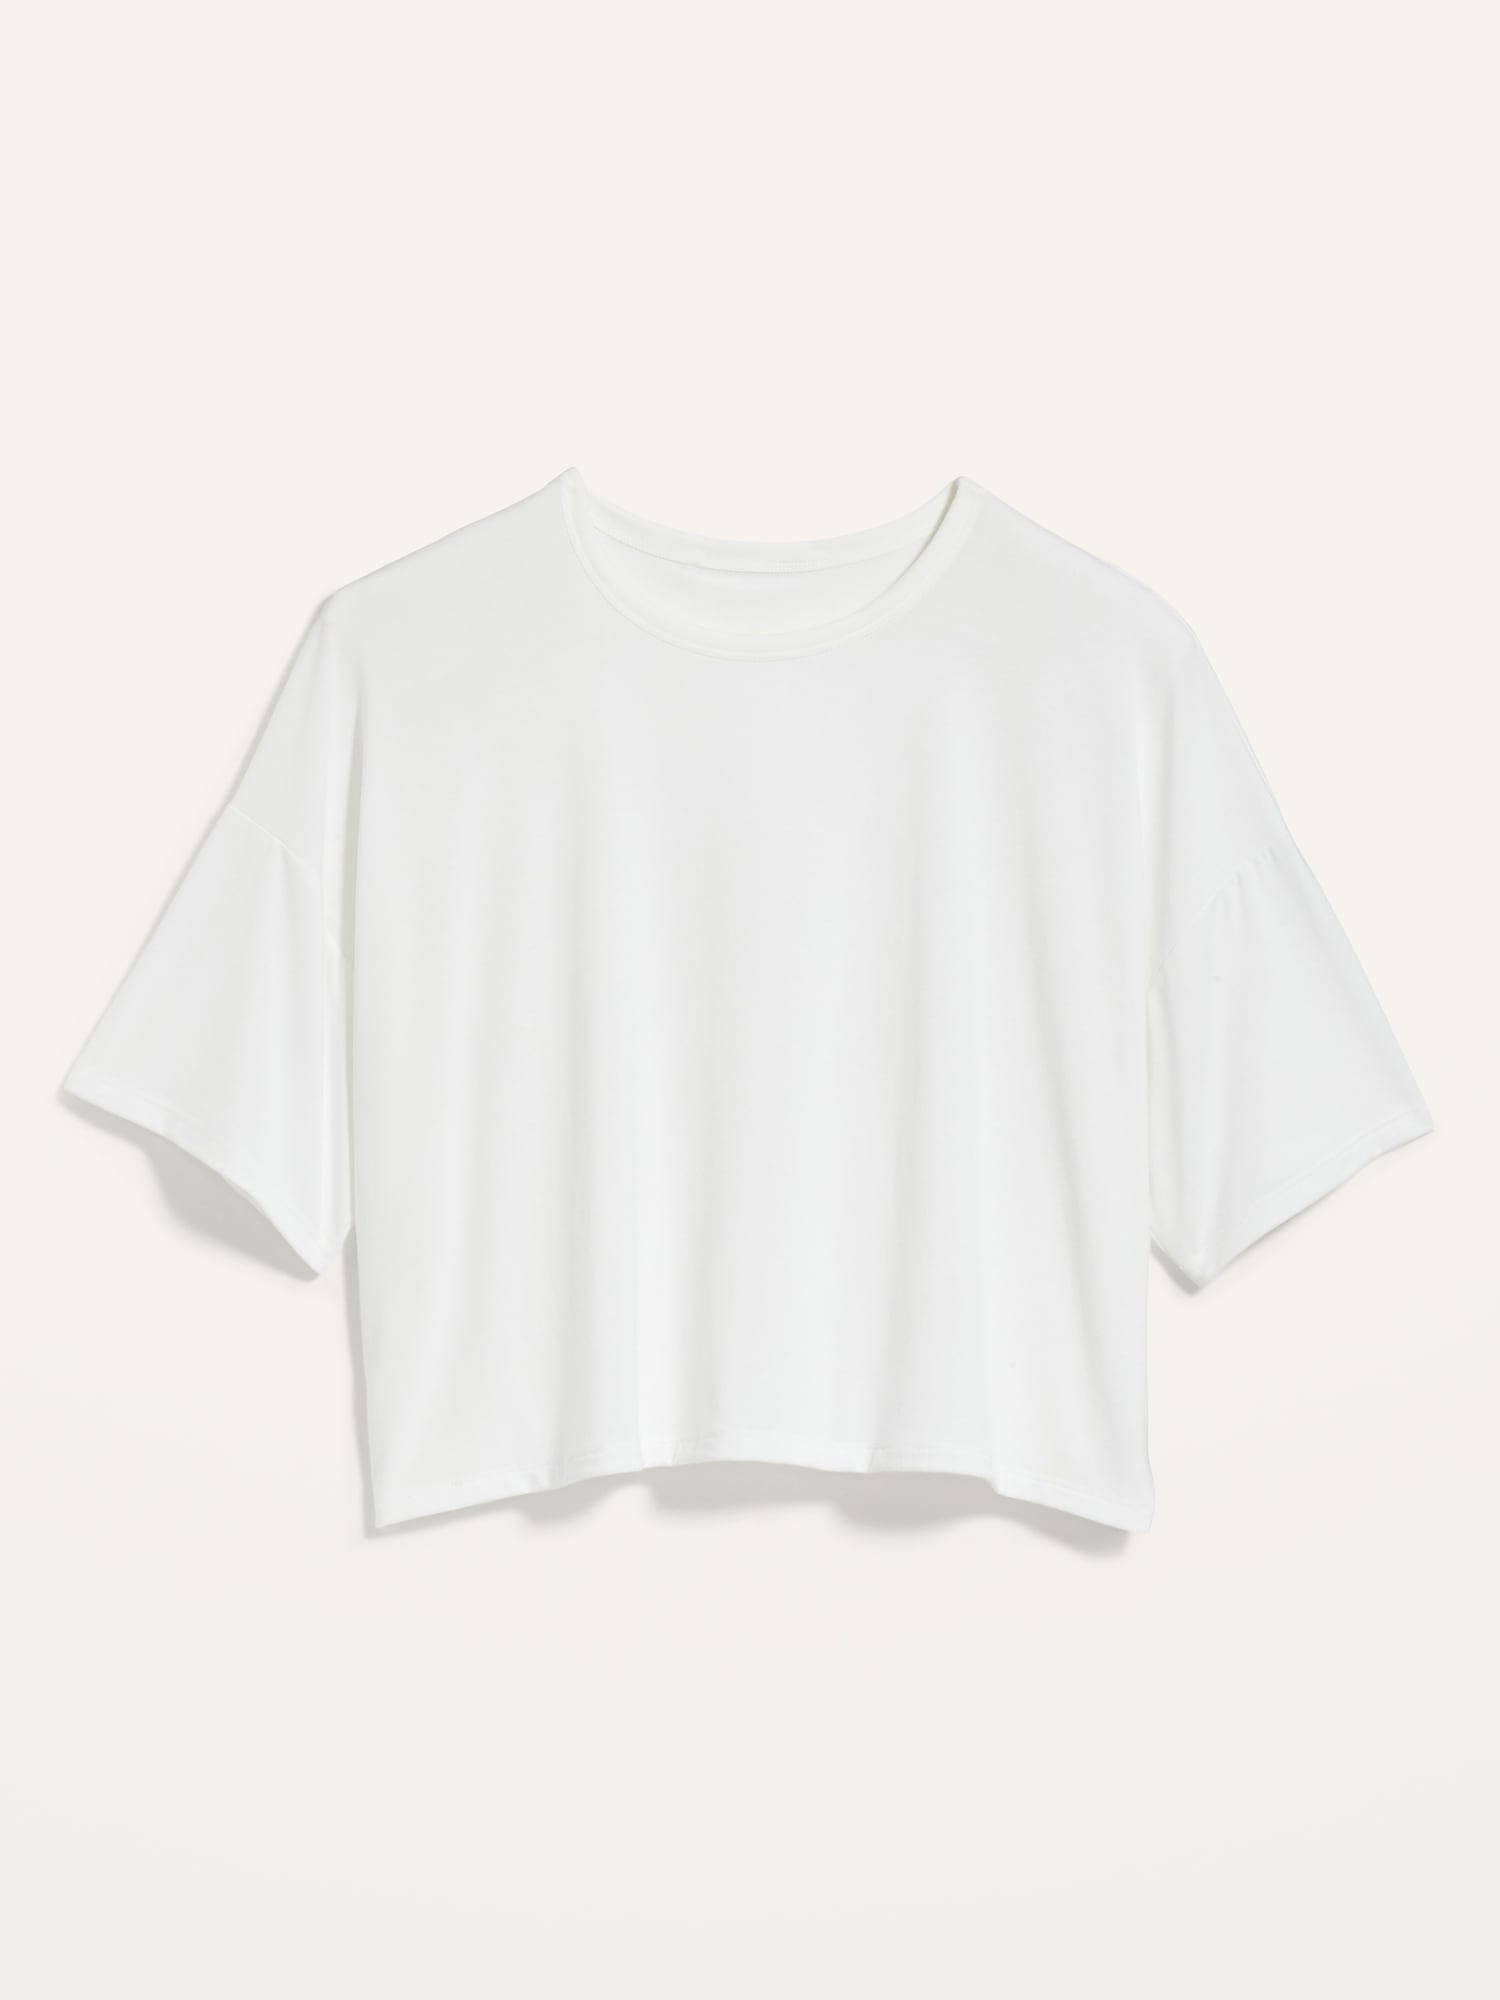 UltraLite All-Day Performance Crop T-Shirt for Women | Old Navy